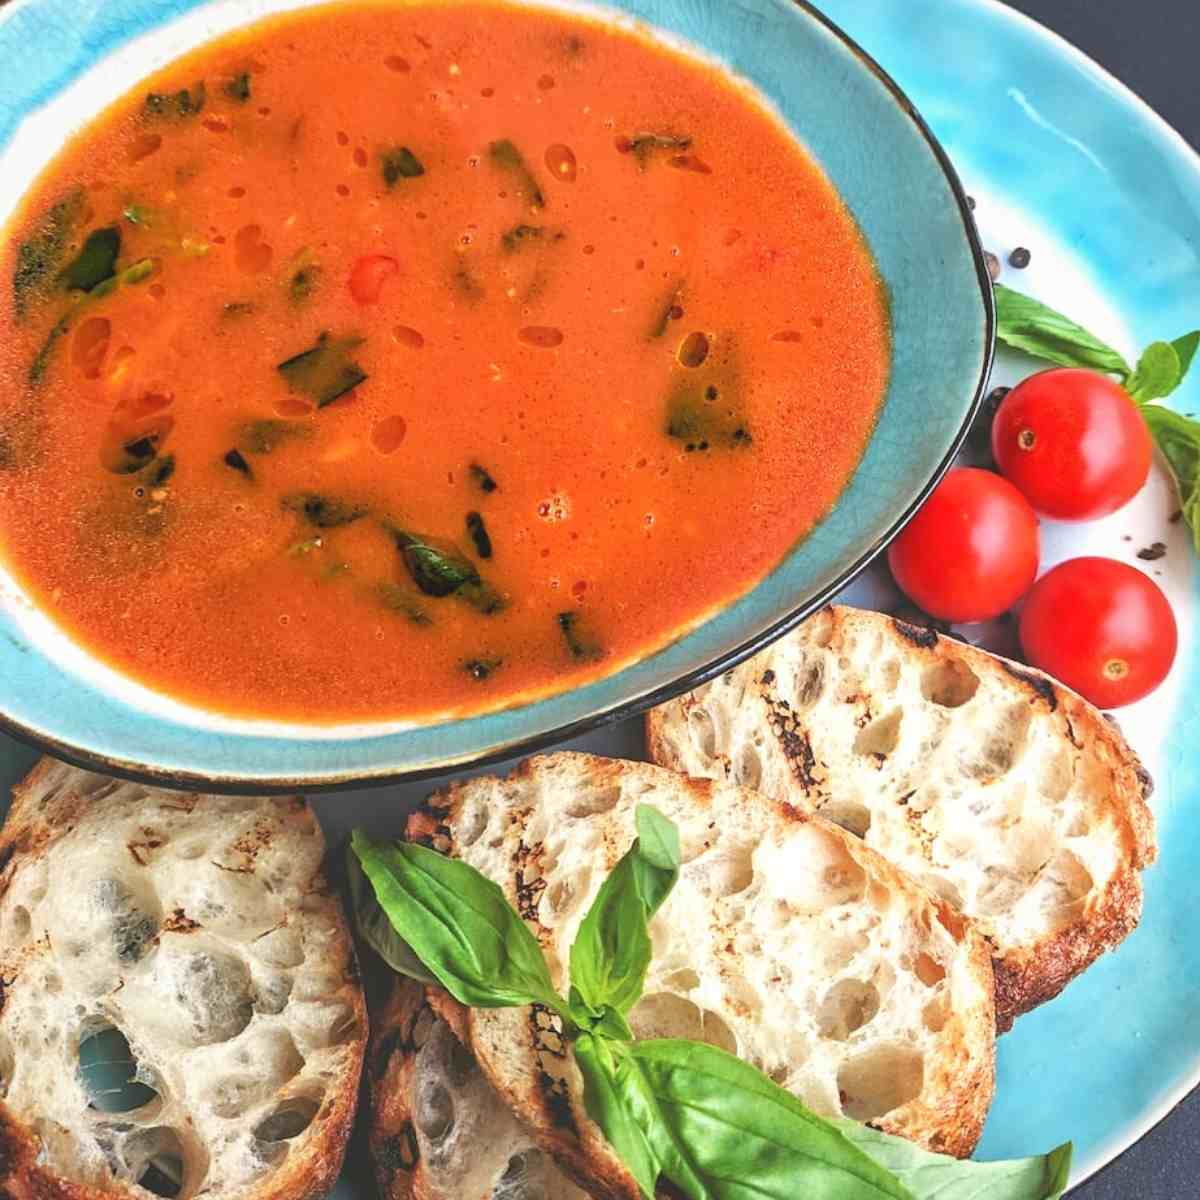 dairy free tomato soup recipe without milk or cream, no butter tomato soup non dairy